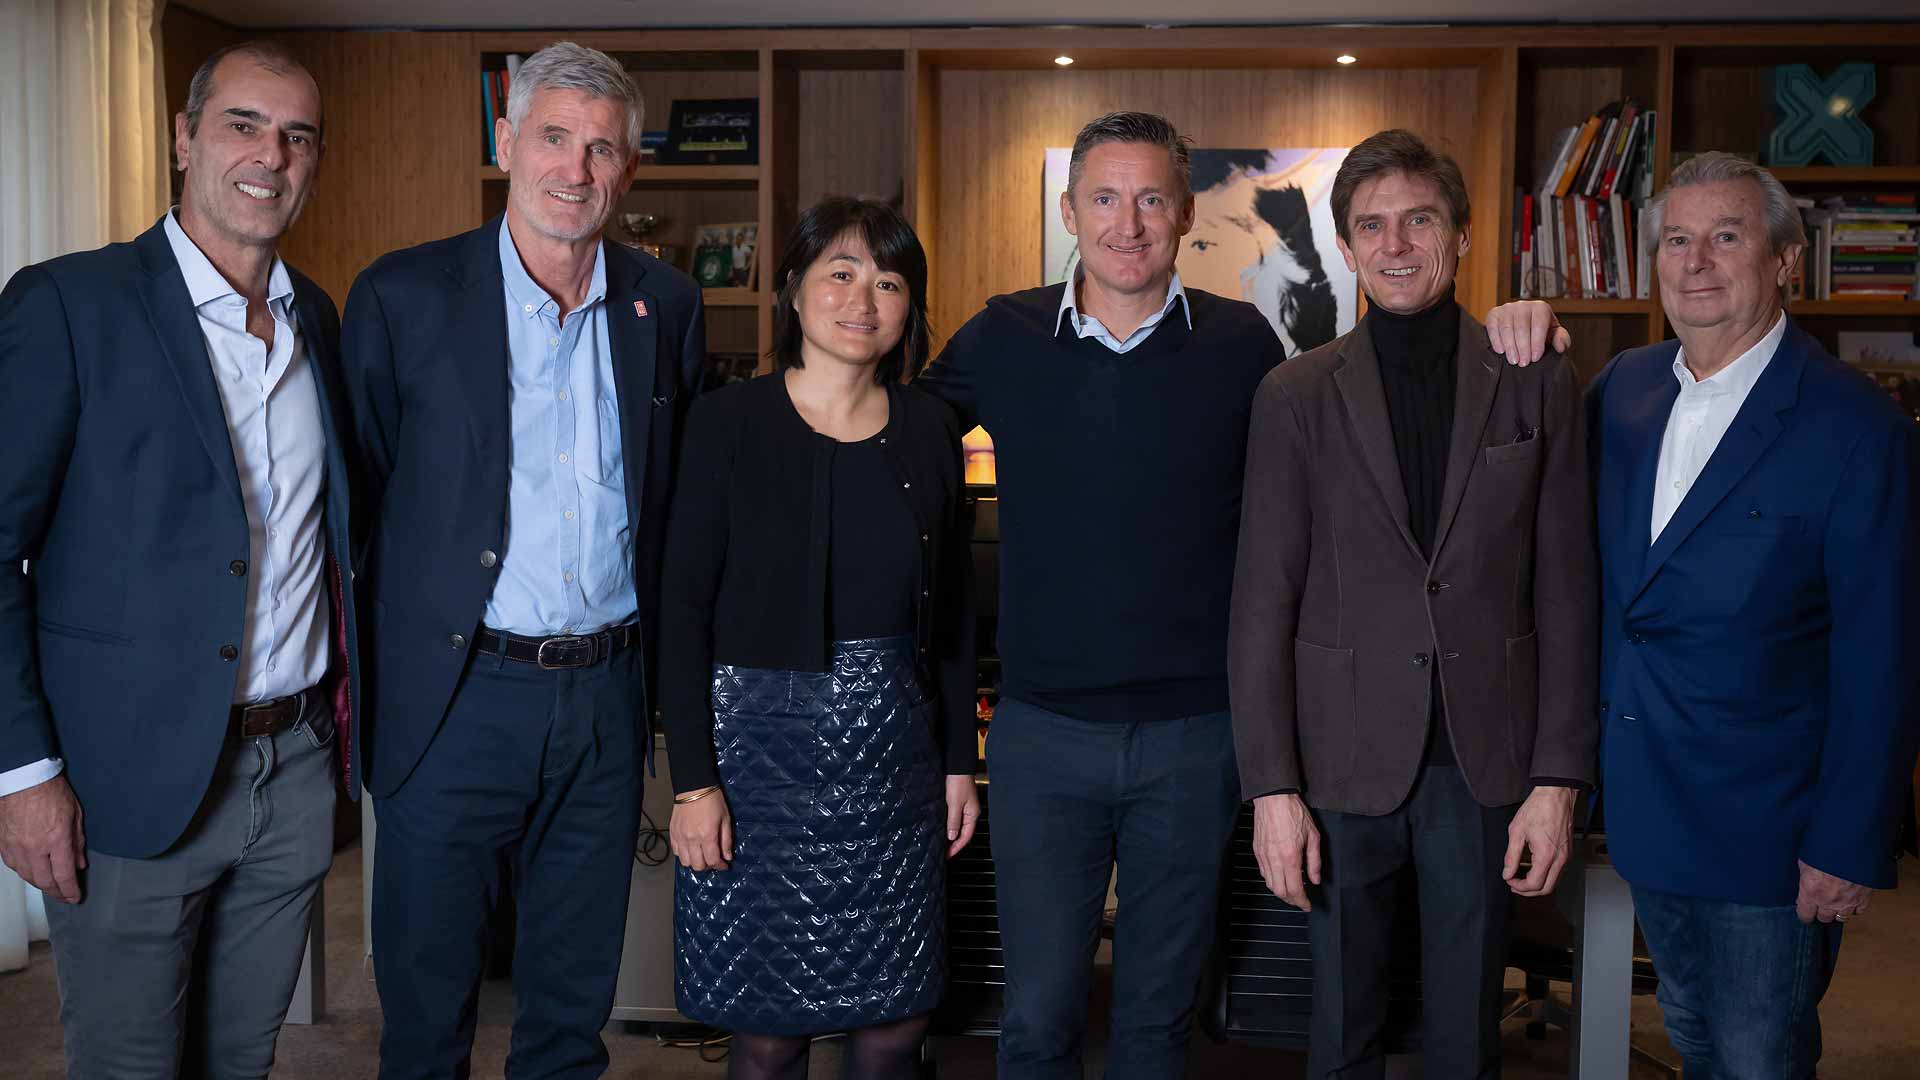 Cédric Pioline, director of the Rolex Paris Masters, Gilles Moretton, president of the FFT, Caroline Flaissier, CEO of the FFT, Andrea Gaudenzi, ATP Chairman, Frédéric Longuépée, CEO of the Paris La Défense Arena, and Jacky Lorenzetti, chairman of the Ovalto Group’s supervisory board.